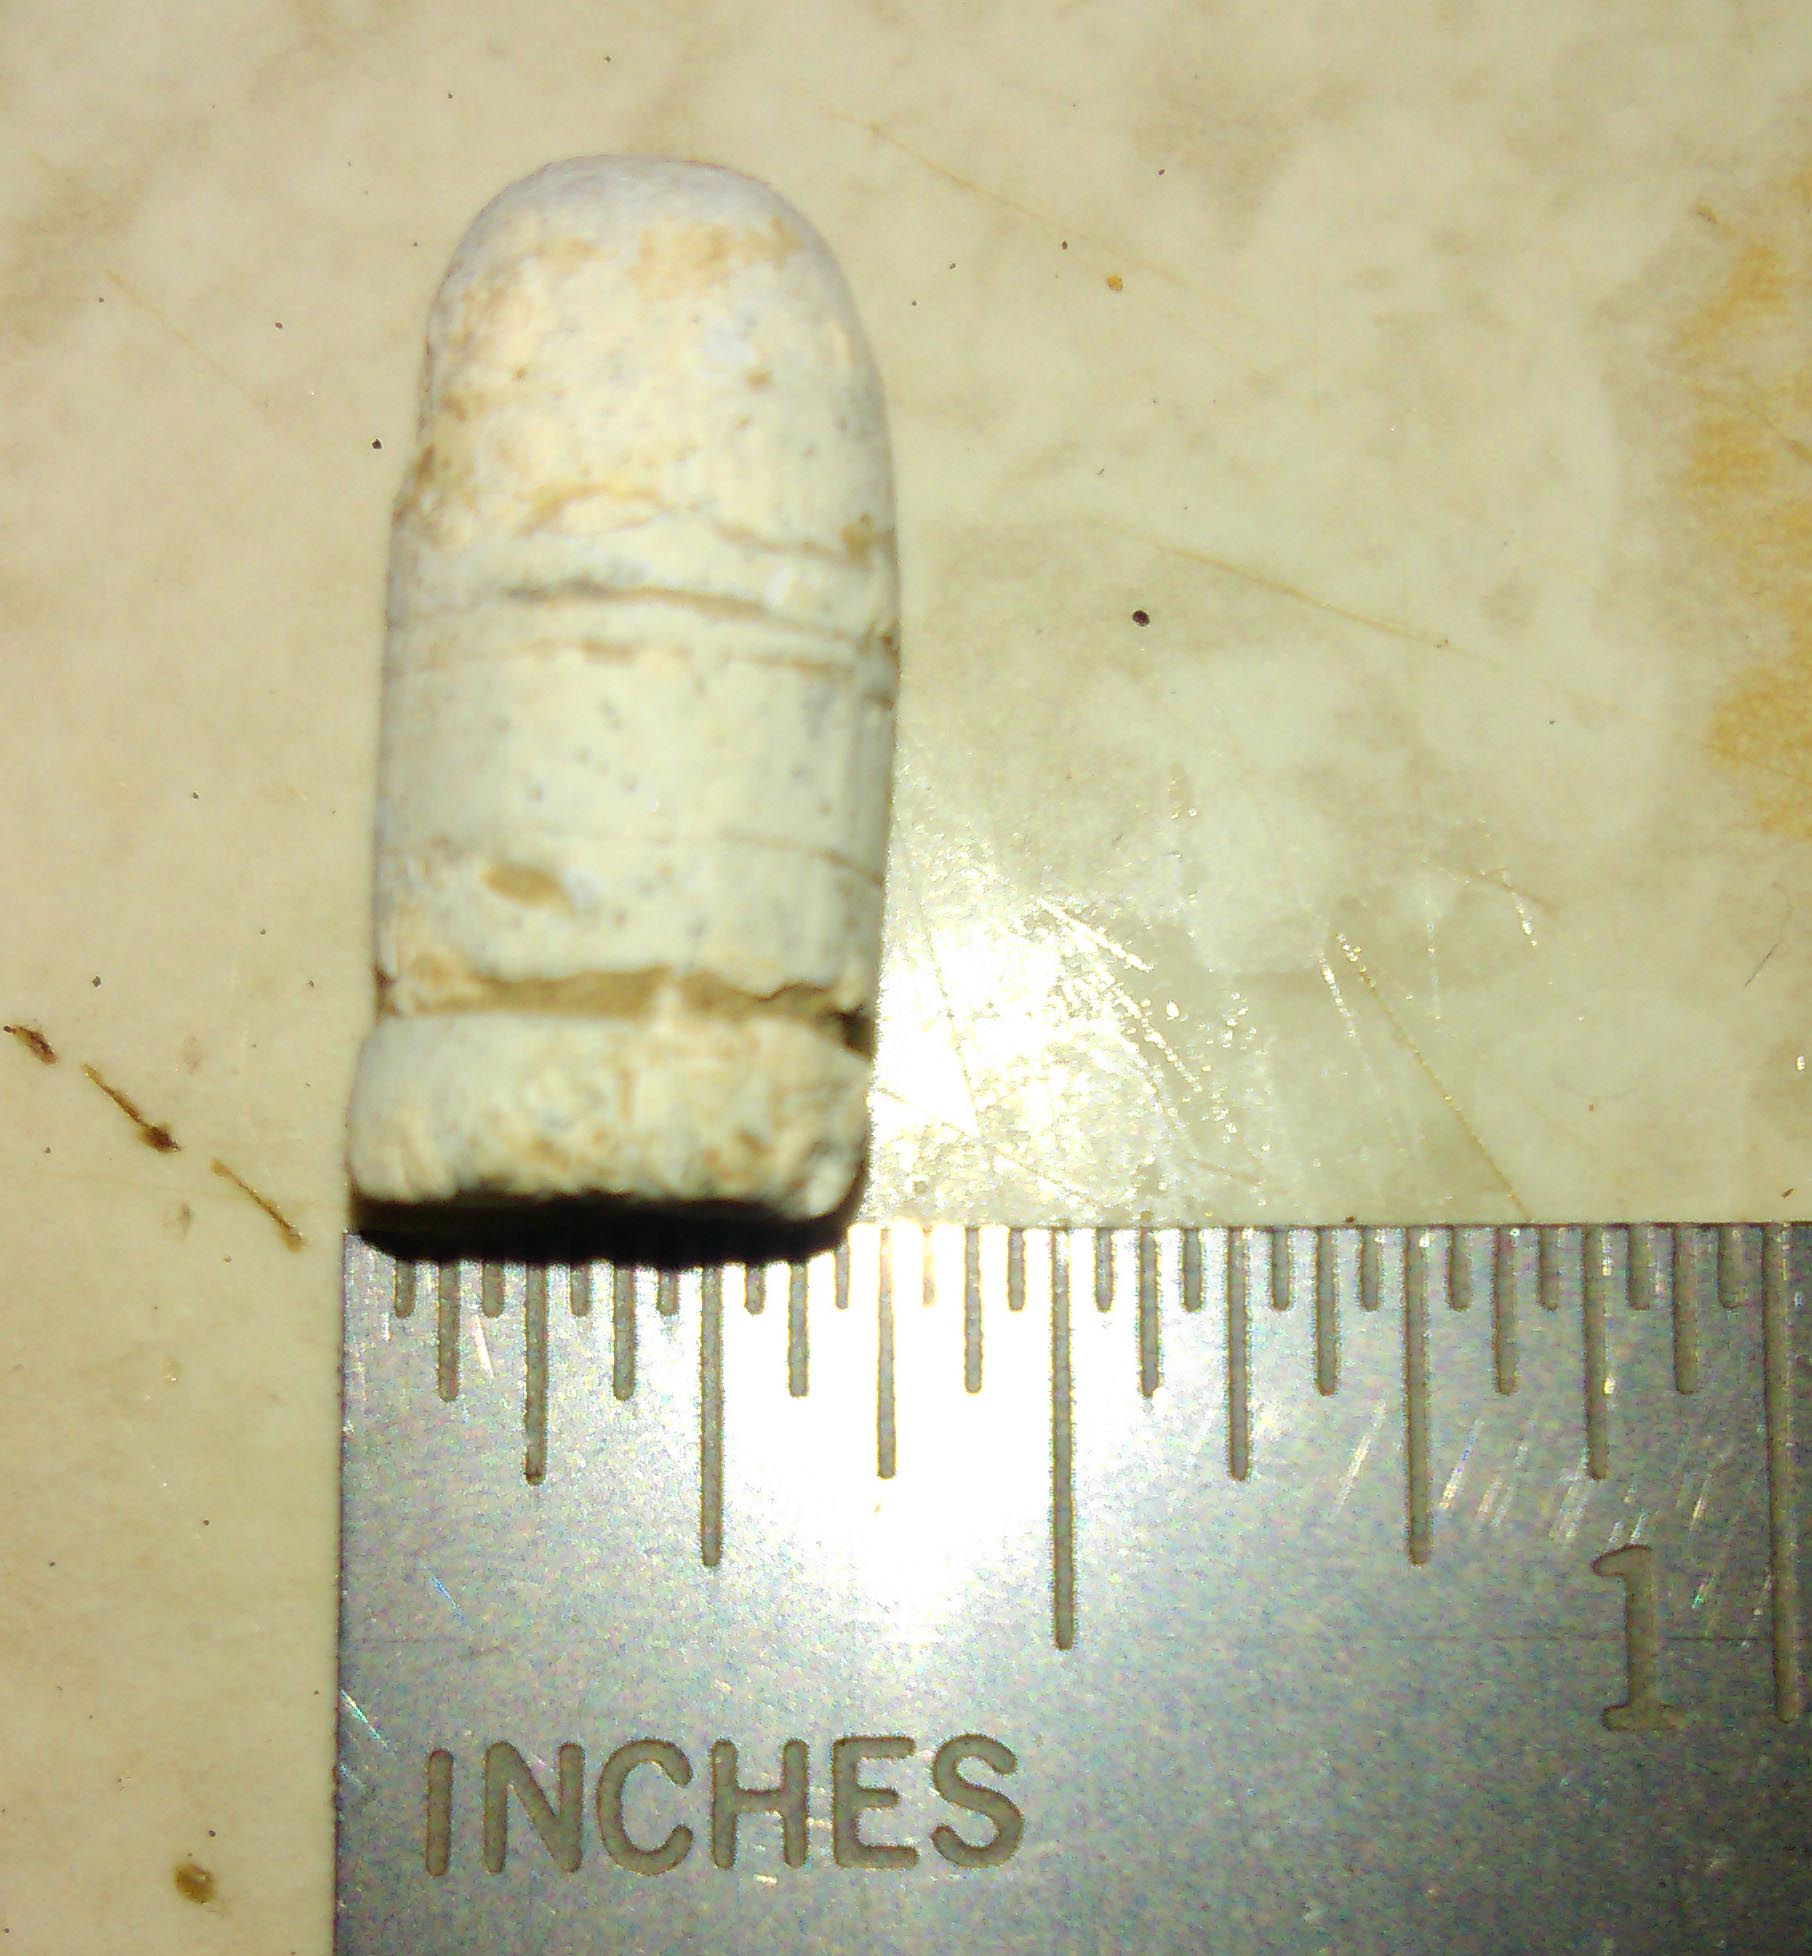 IMAG1269 appears to be a 36 or 357 cal. Found in 2016.